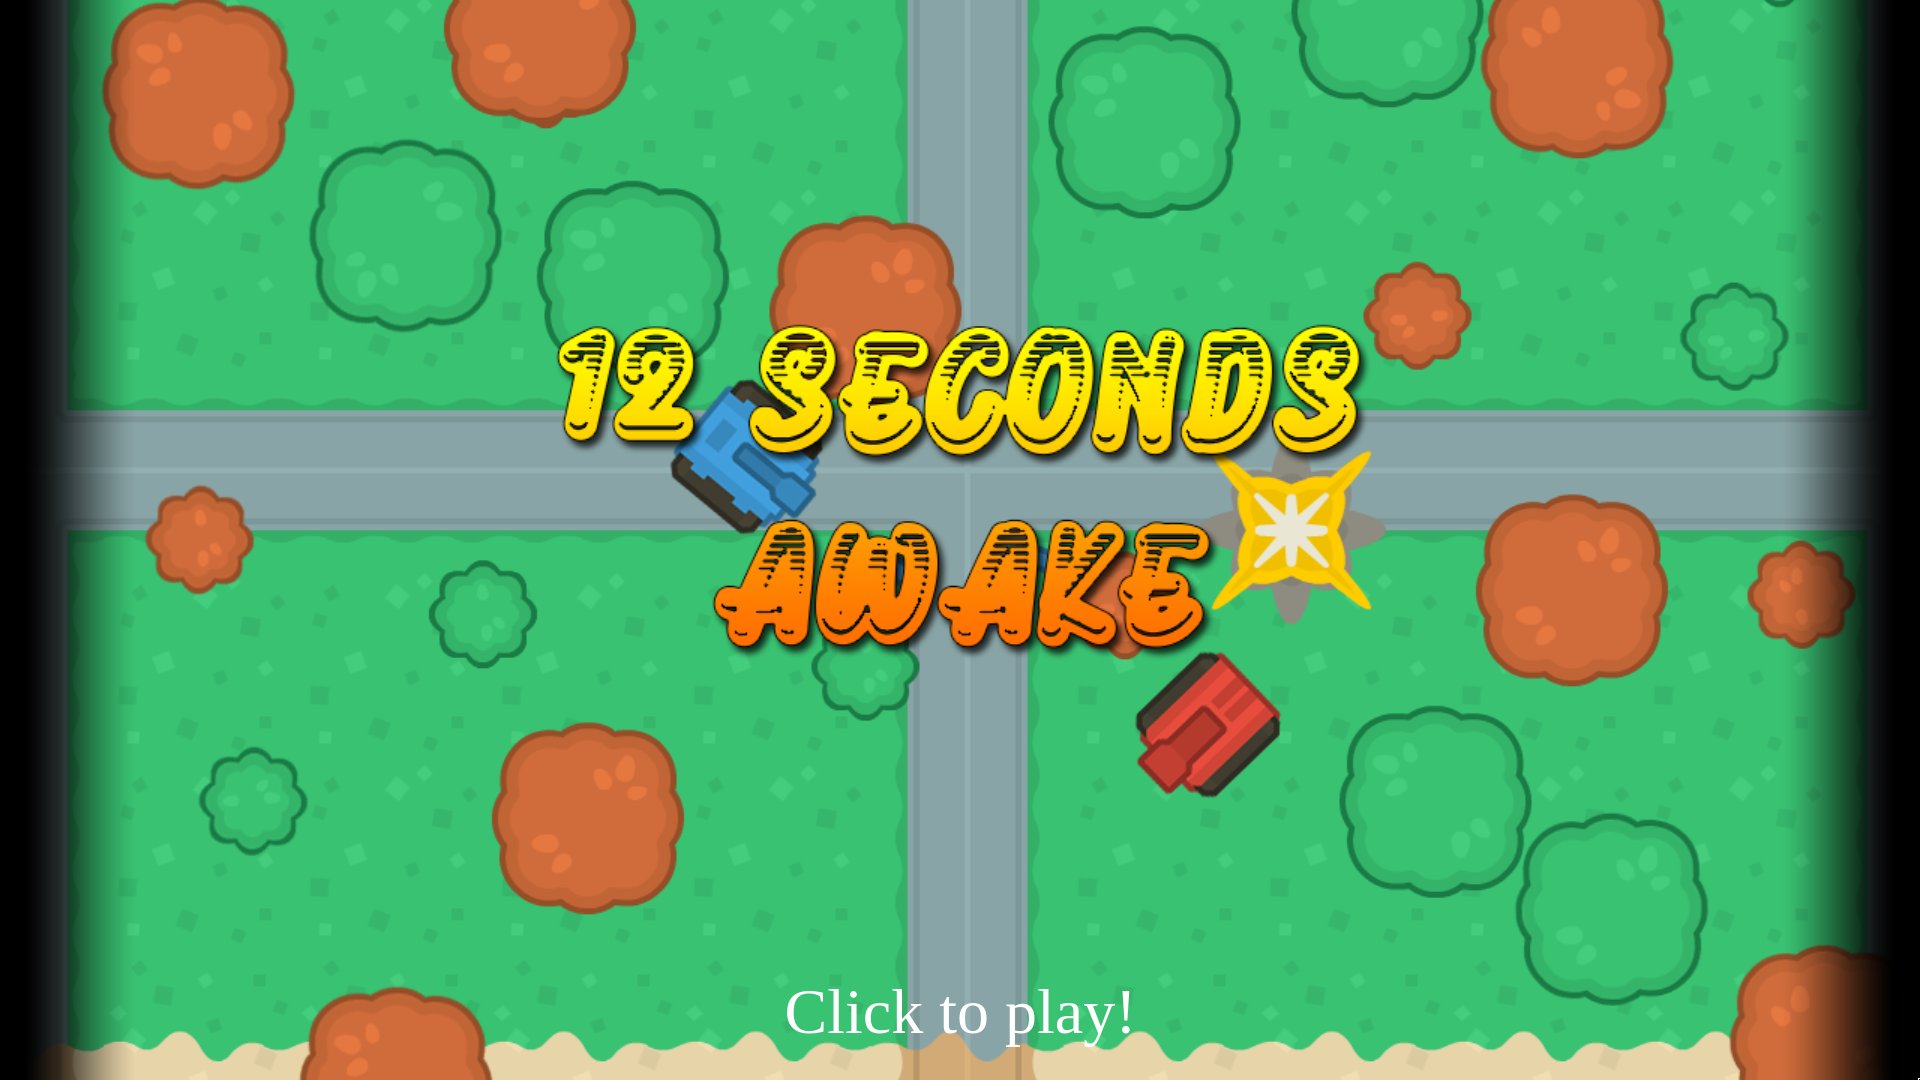 Title screen: click to play